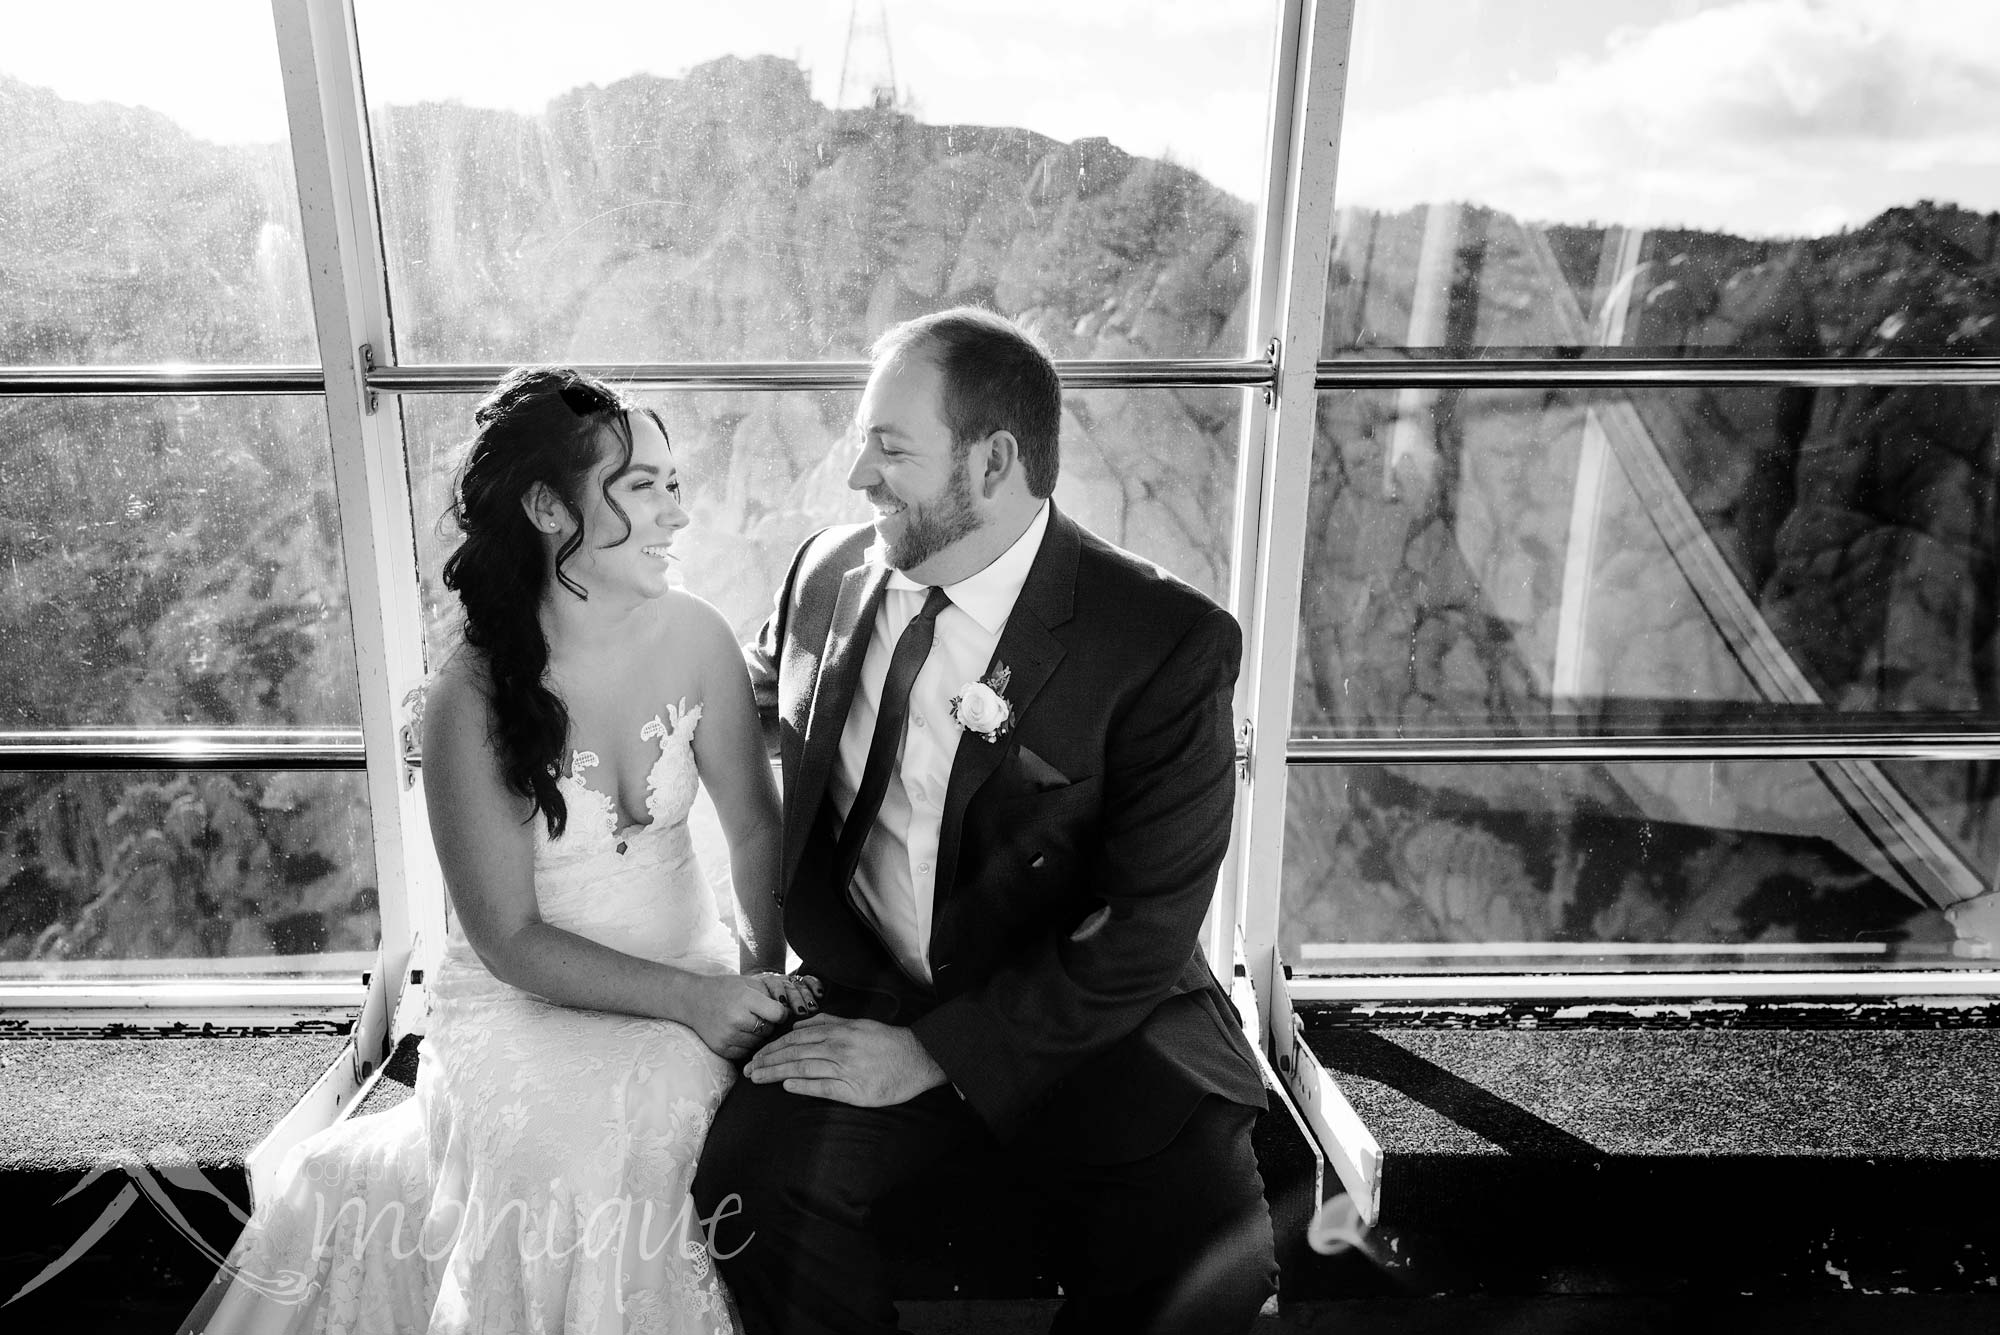 Palisades Tahoe wedding photography with the bride and groom in the tram riding up to High Camp